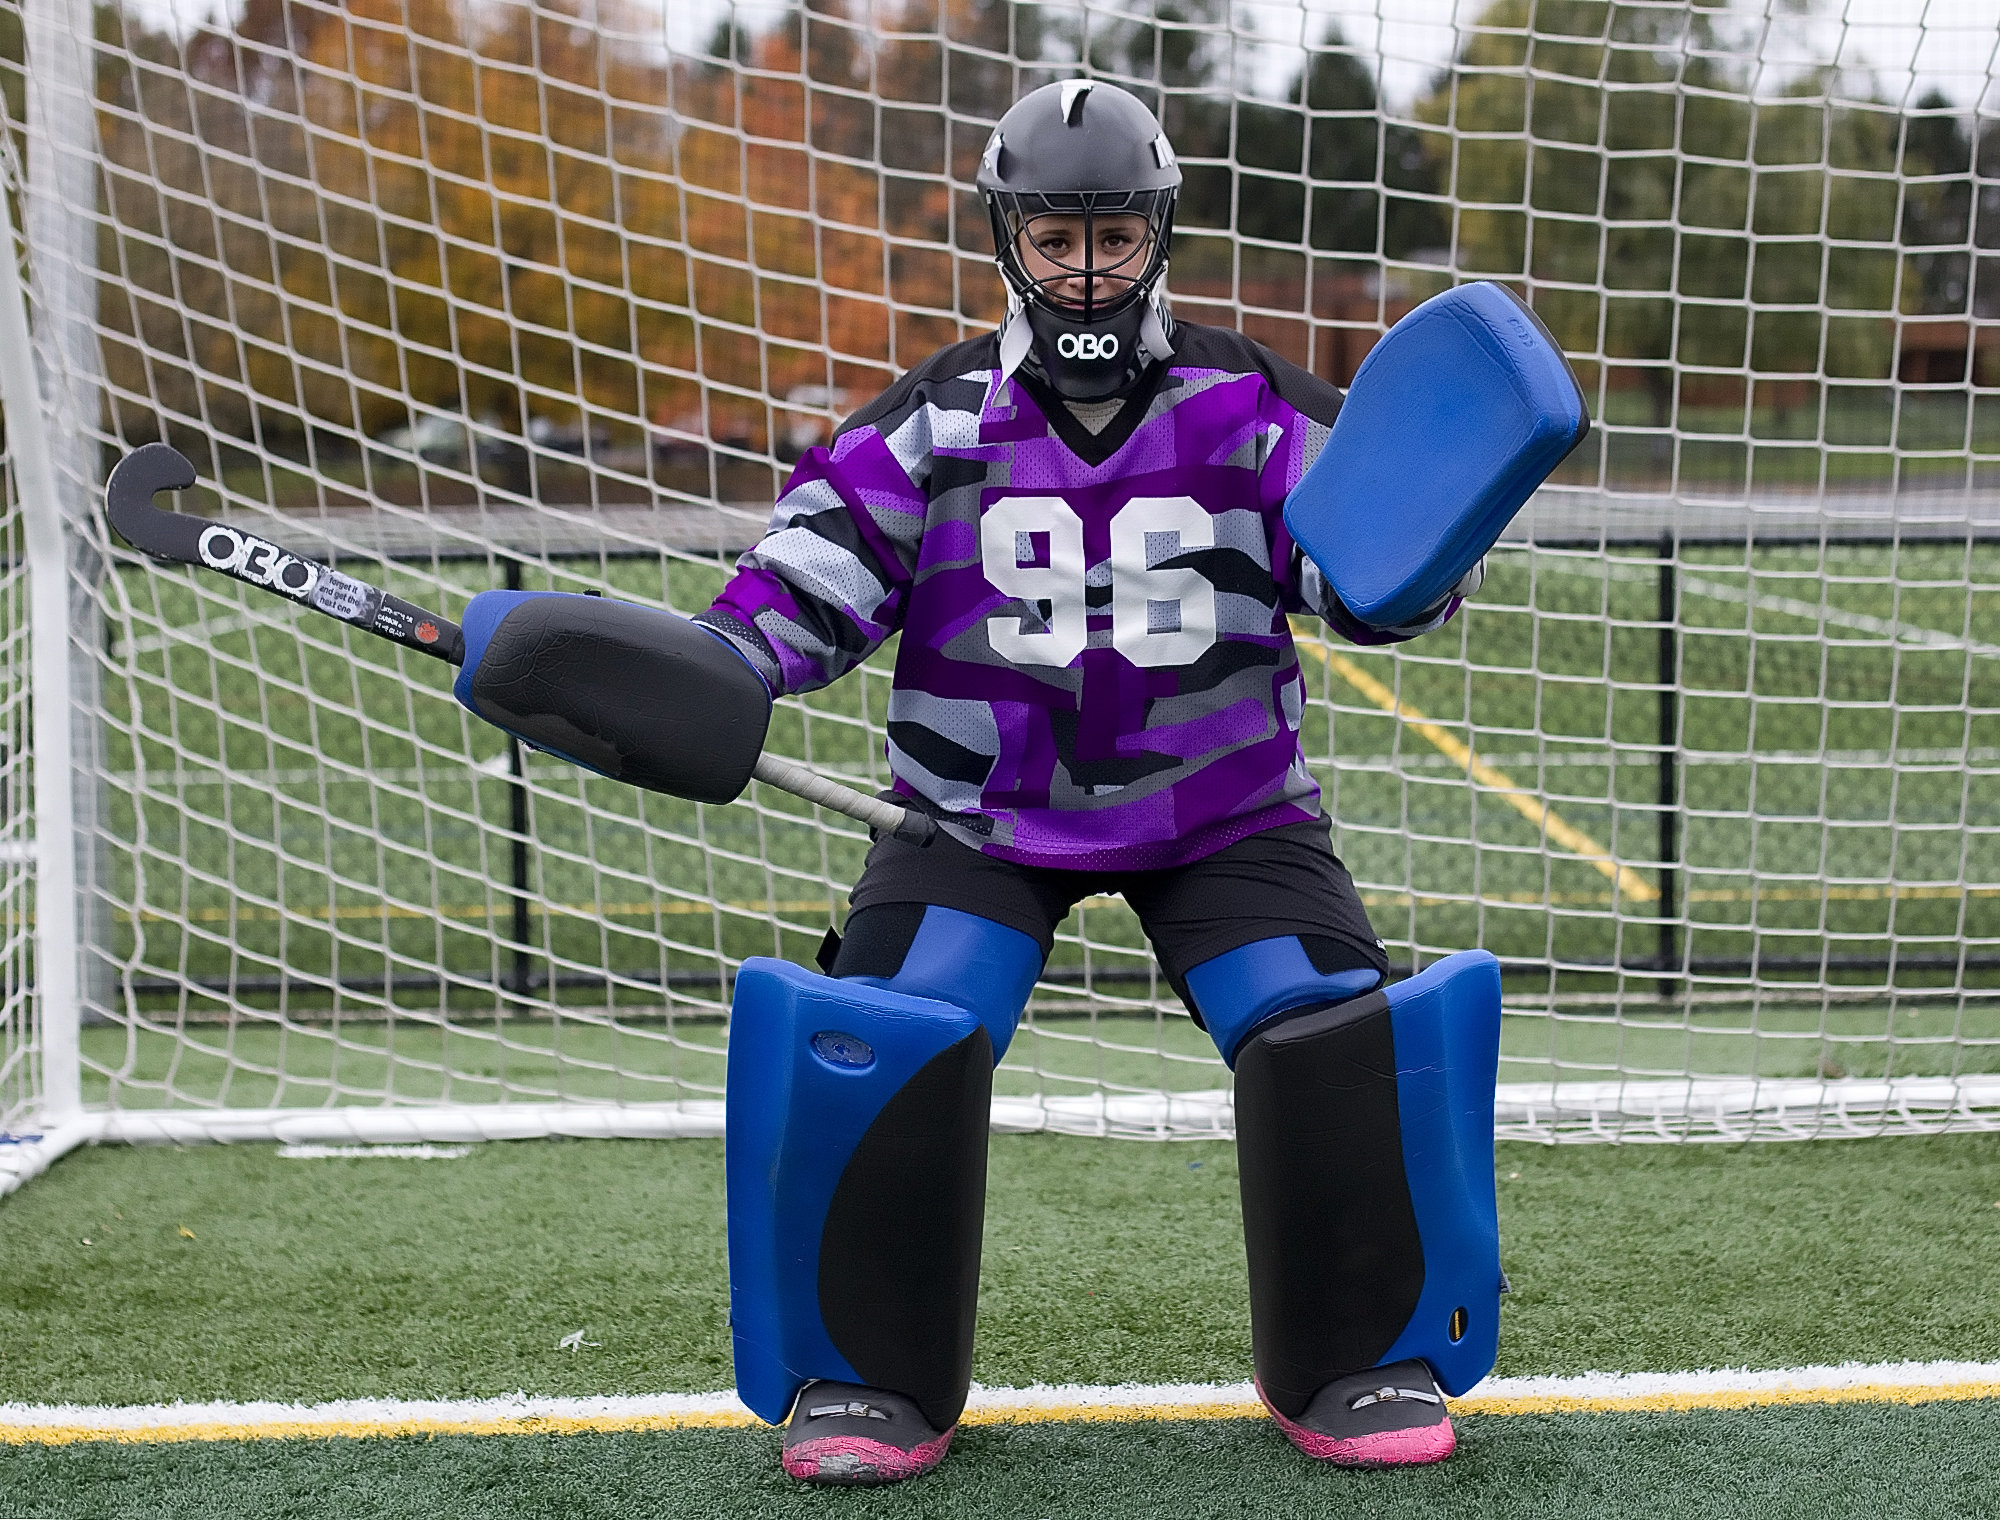 Going Deep Two Local Field Hockey Goalies Dominate The